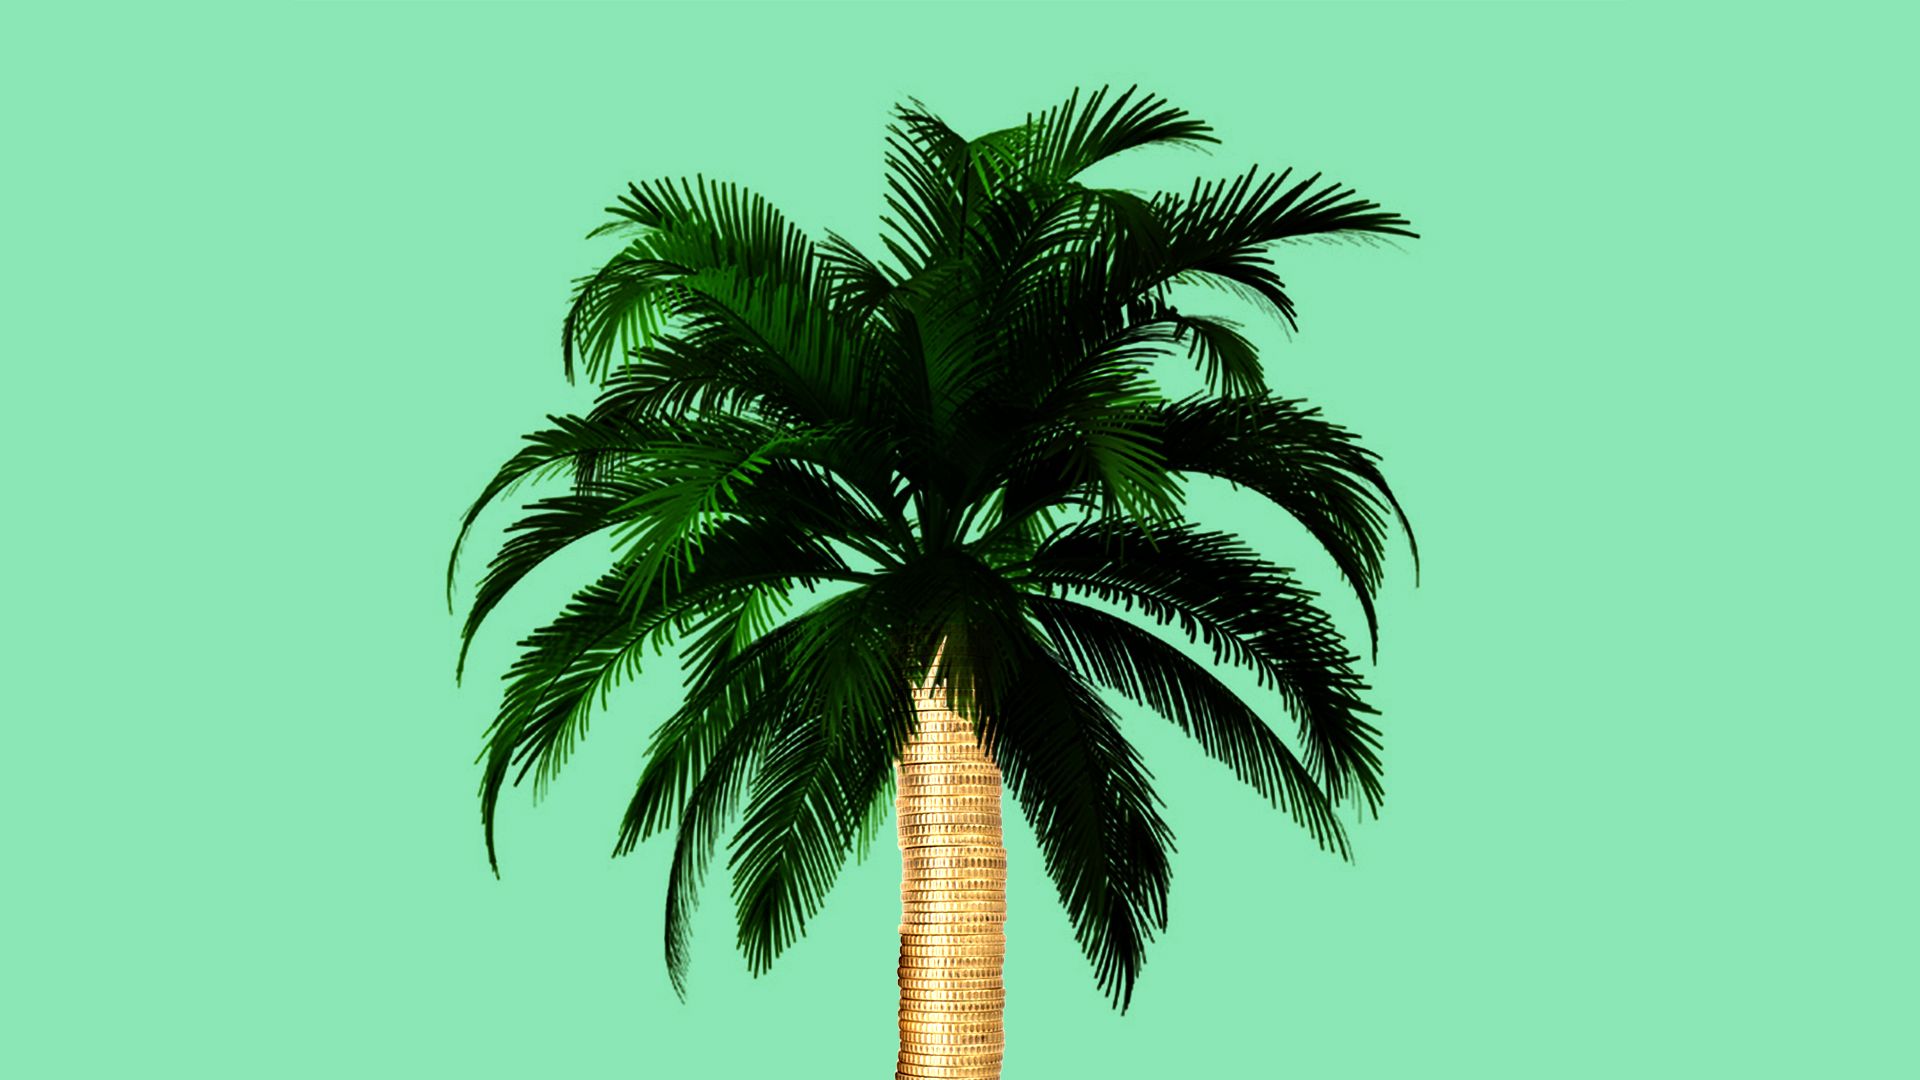 Illustration of a palm tree with a stack of gold coins as the trunk 